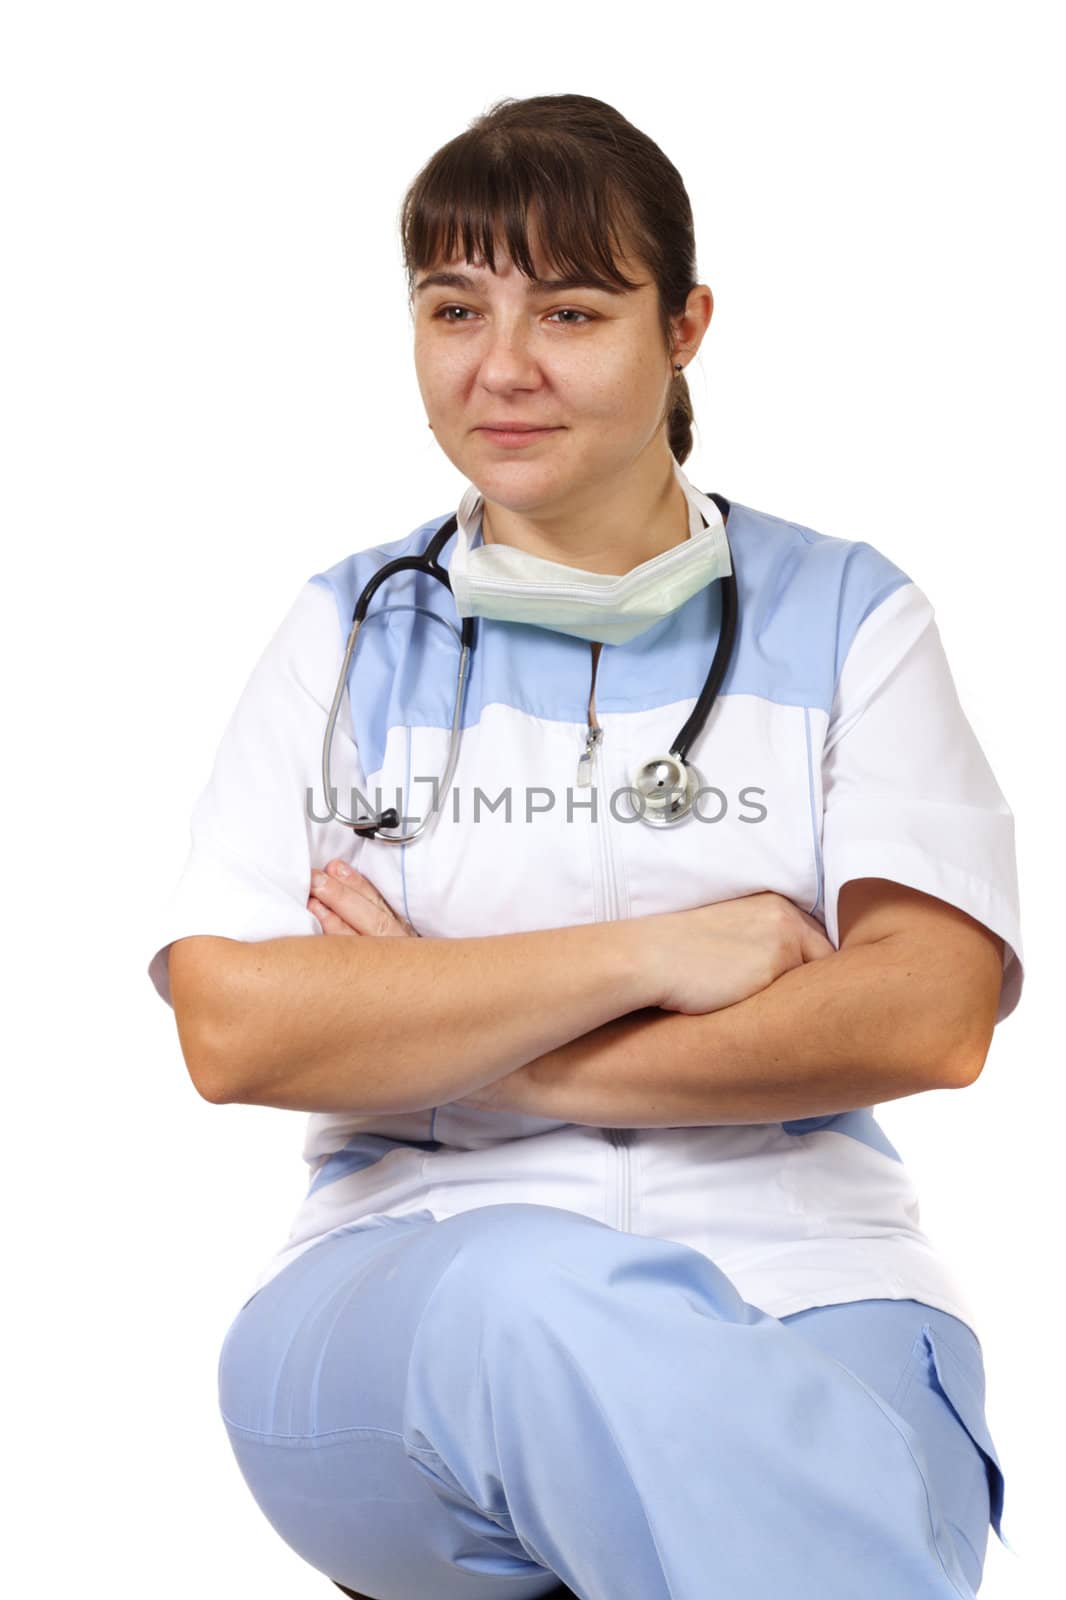 woman - medical, photo on the white background